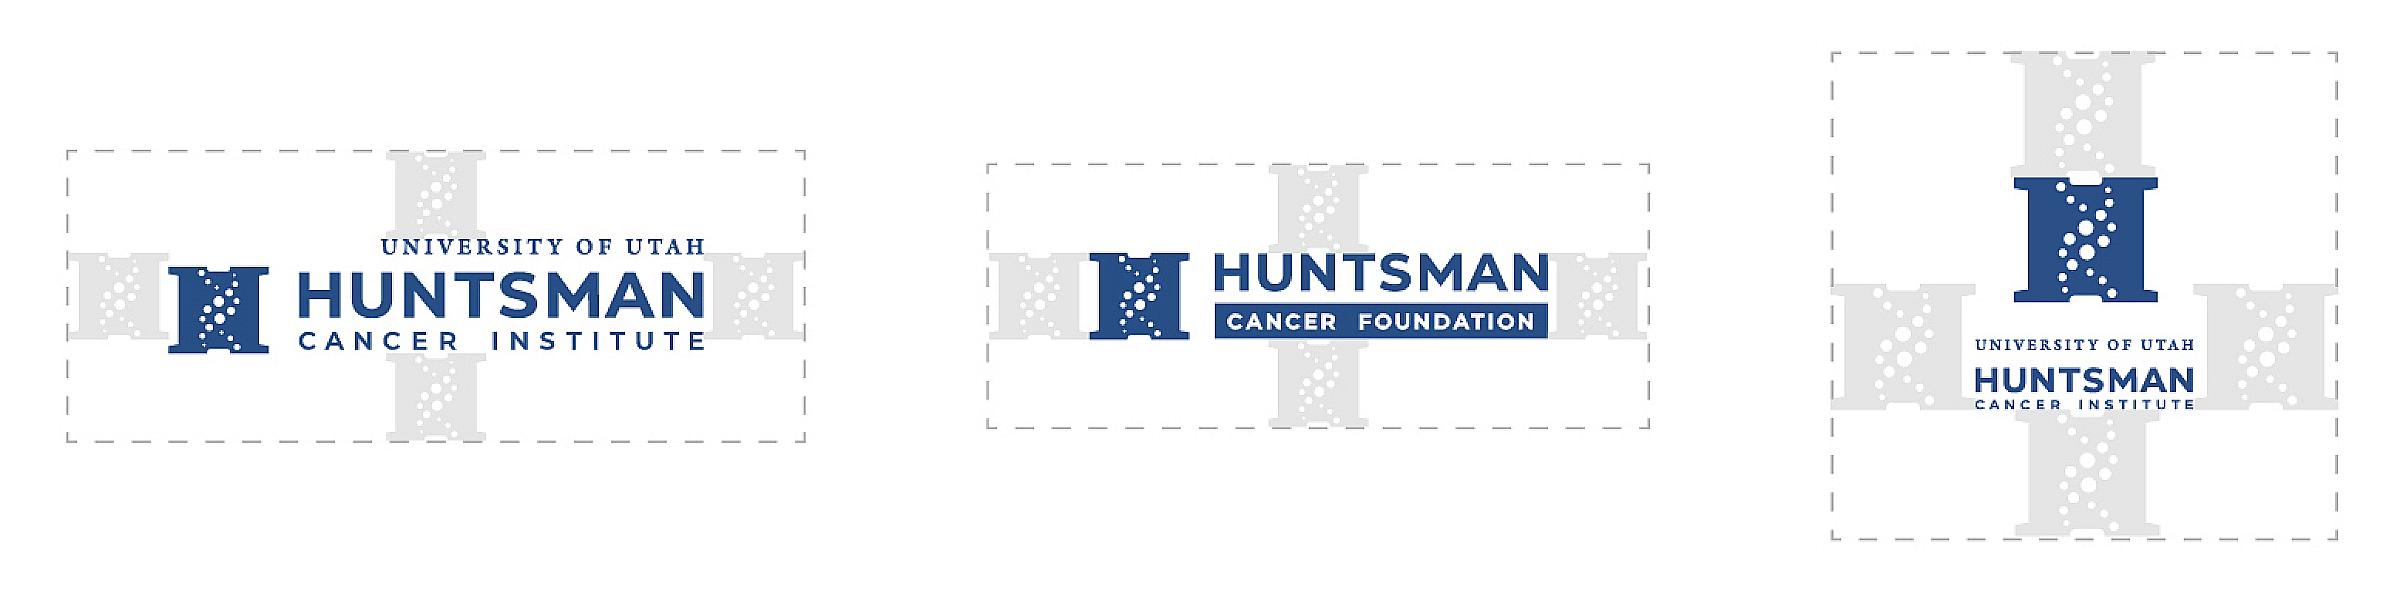 Examples of padding around the Huntsman Cancer Institute logo